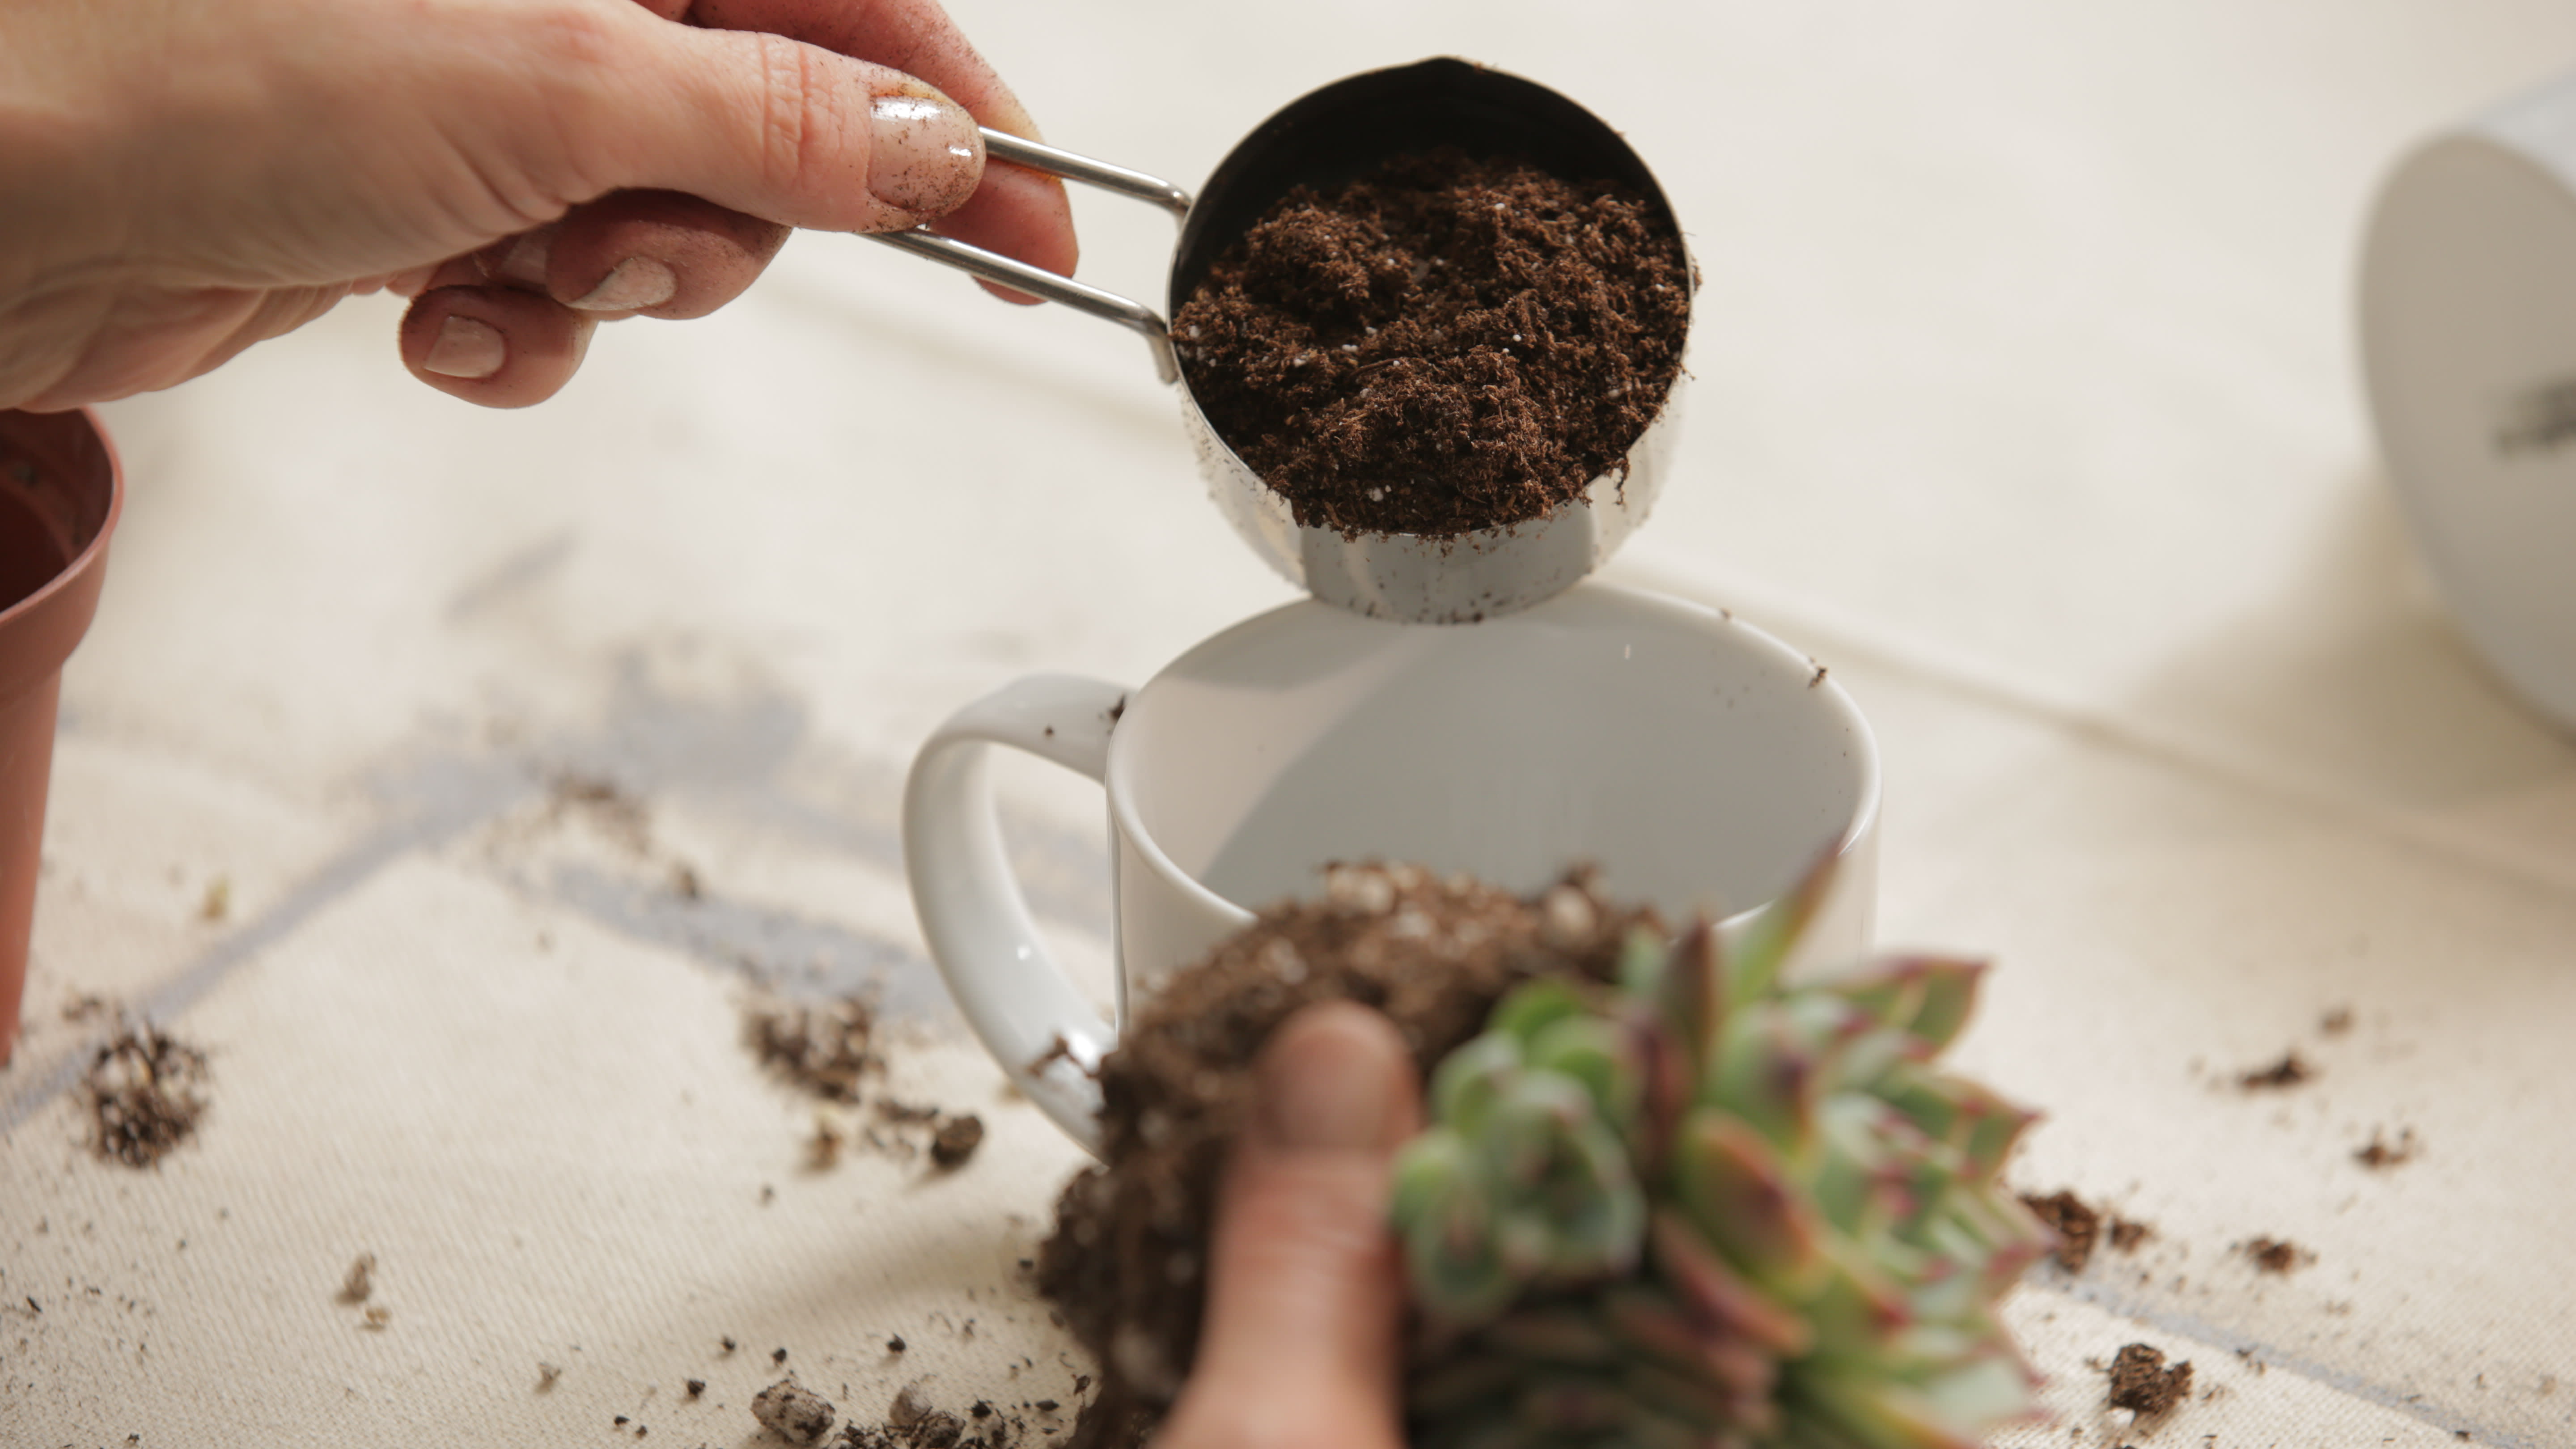 Hanging coffee cup planter — A Charming Project